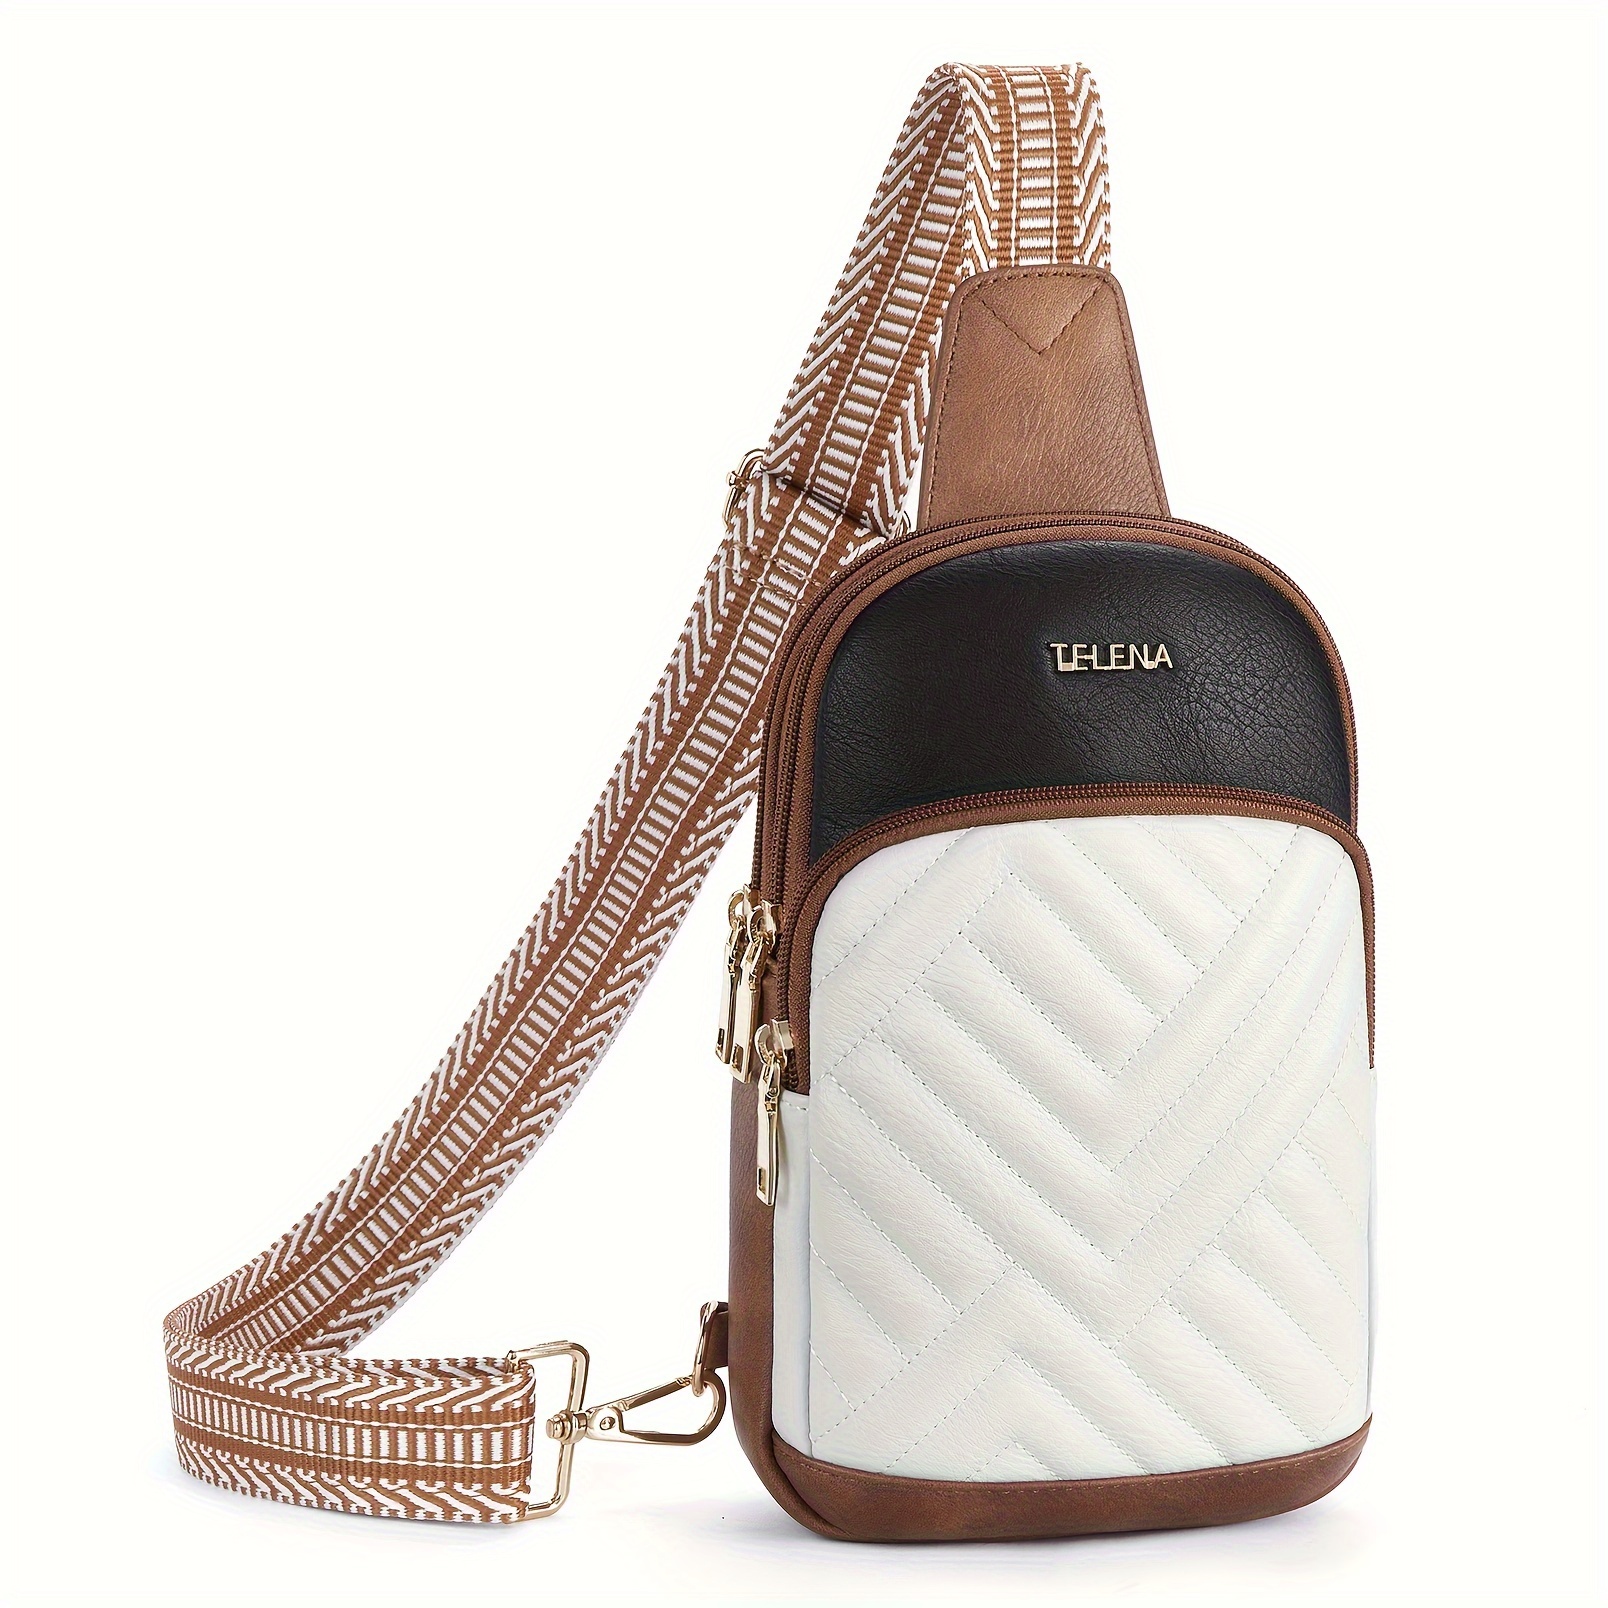 

Retro Quilted Sling Bag, Crossbody Vegan Leather Fanny Pack, Chest Bag For Women With Adjustable Strap